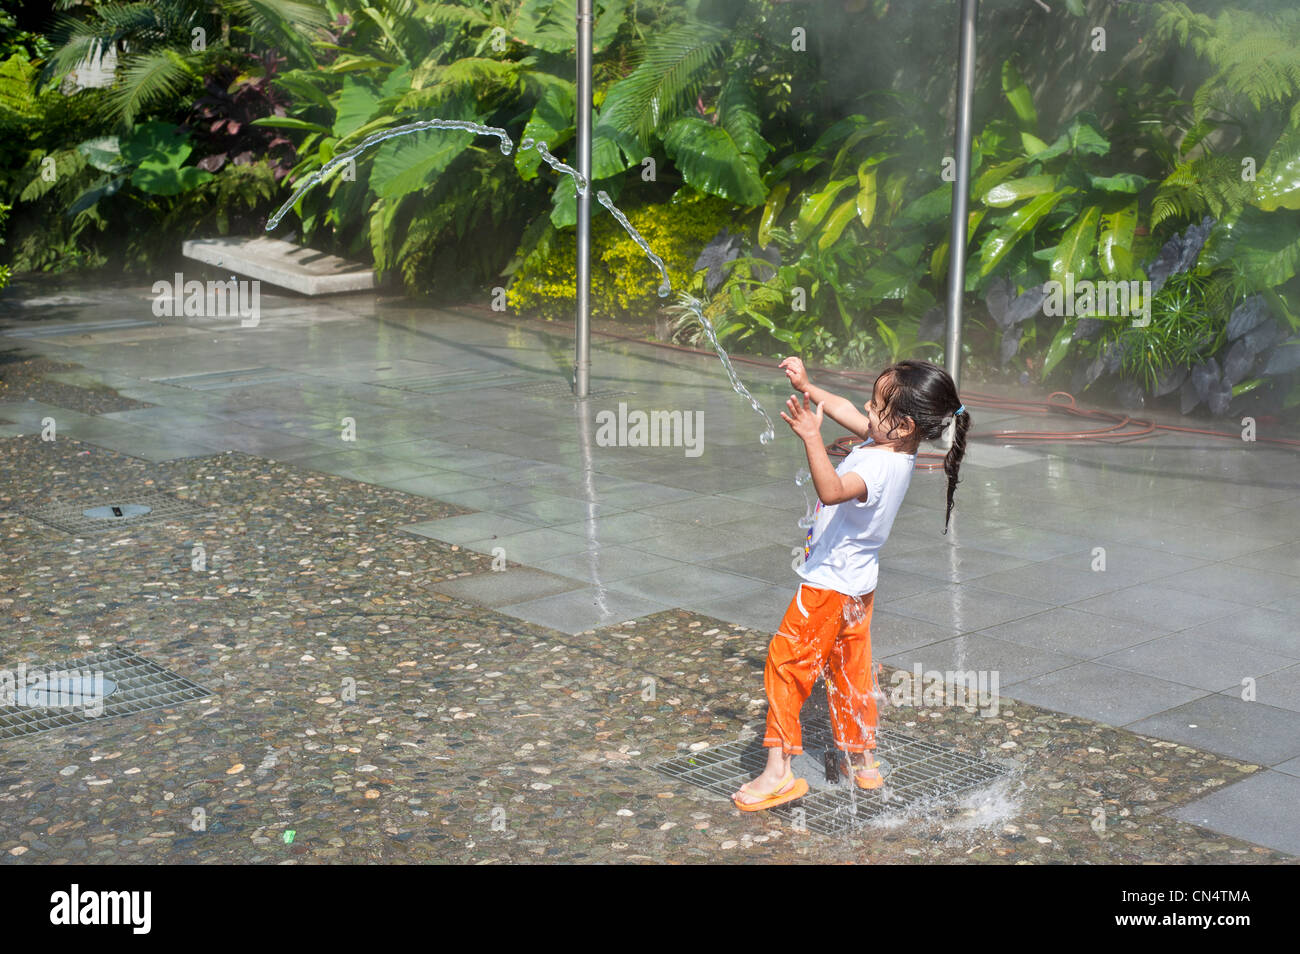 Colombia, Antioquia Department, Medellin, the Parque Explora on Sunday afternoon Stock Photo